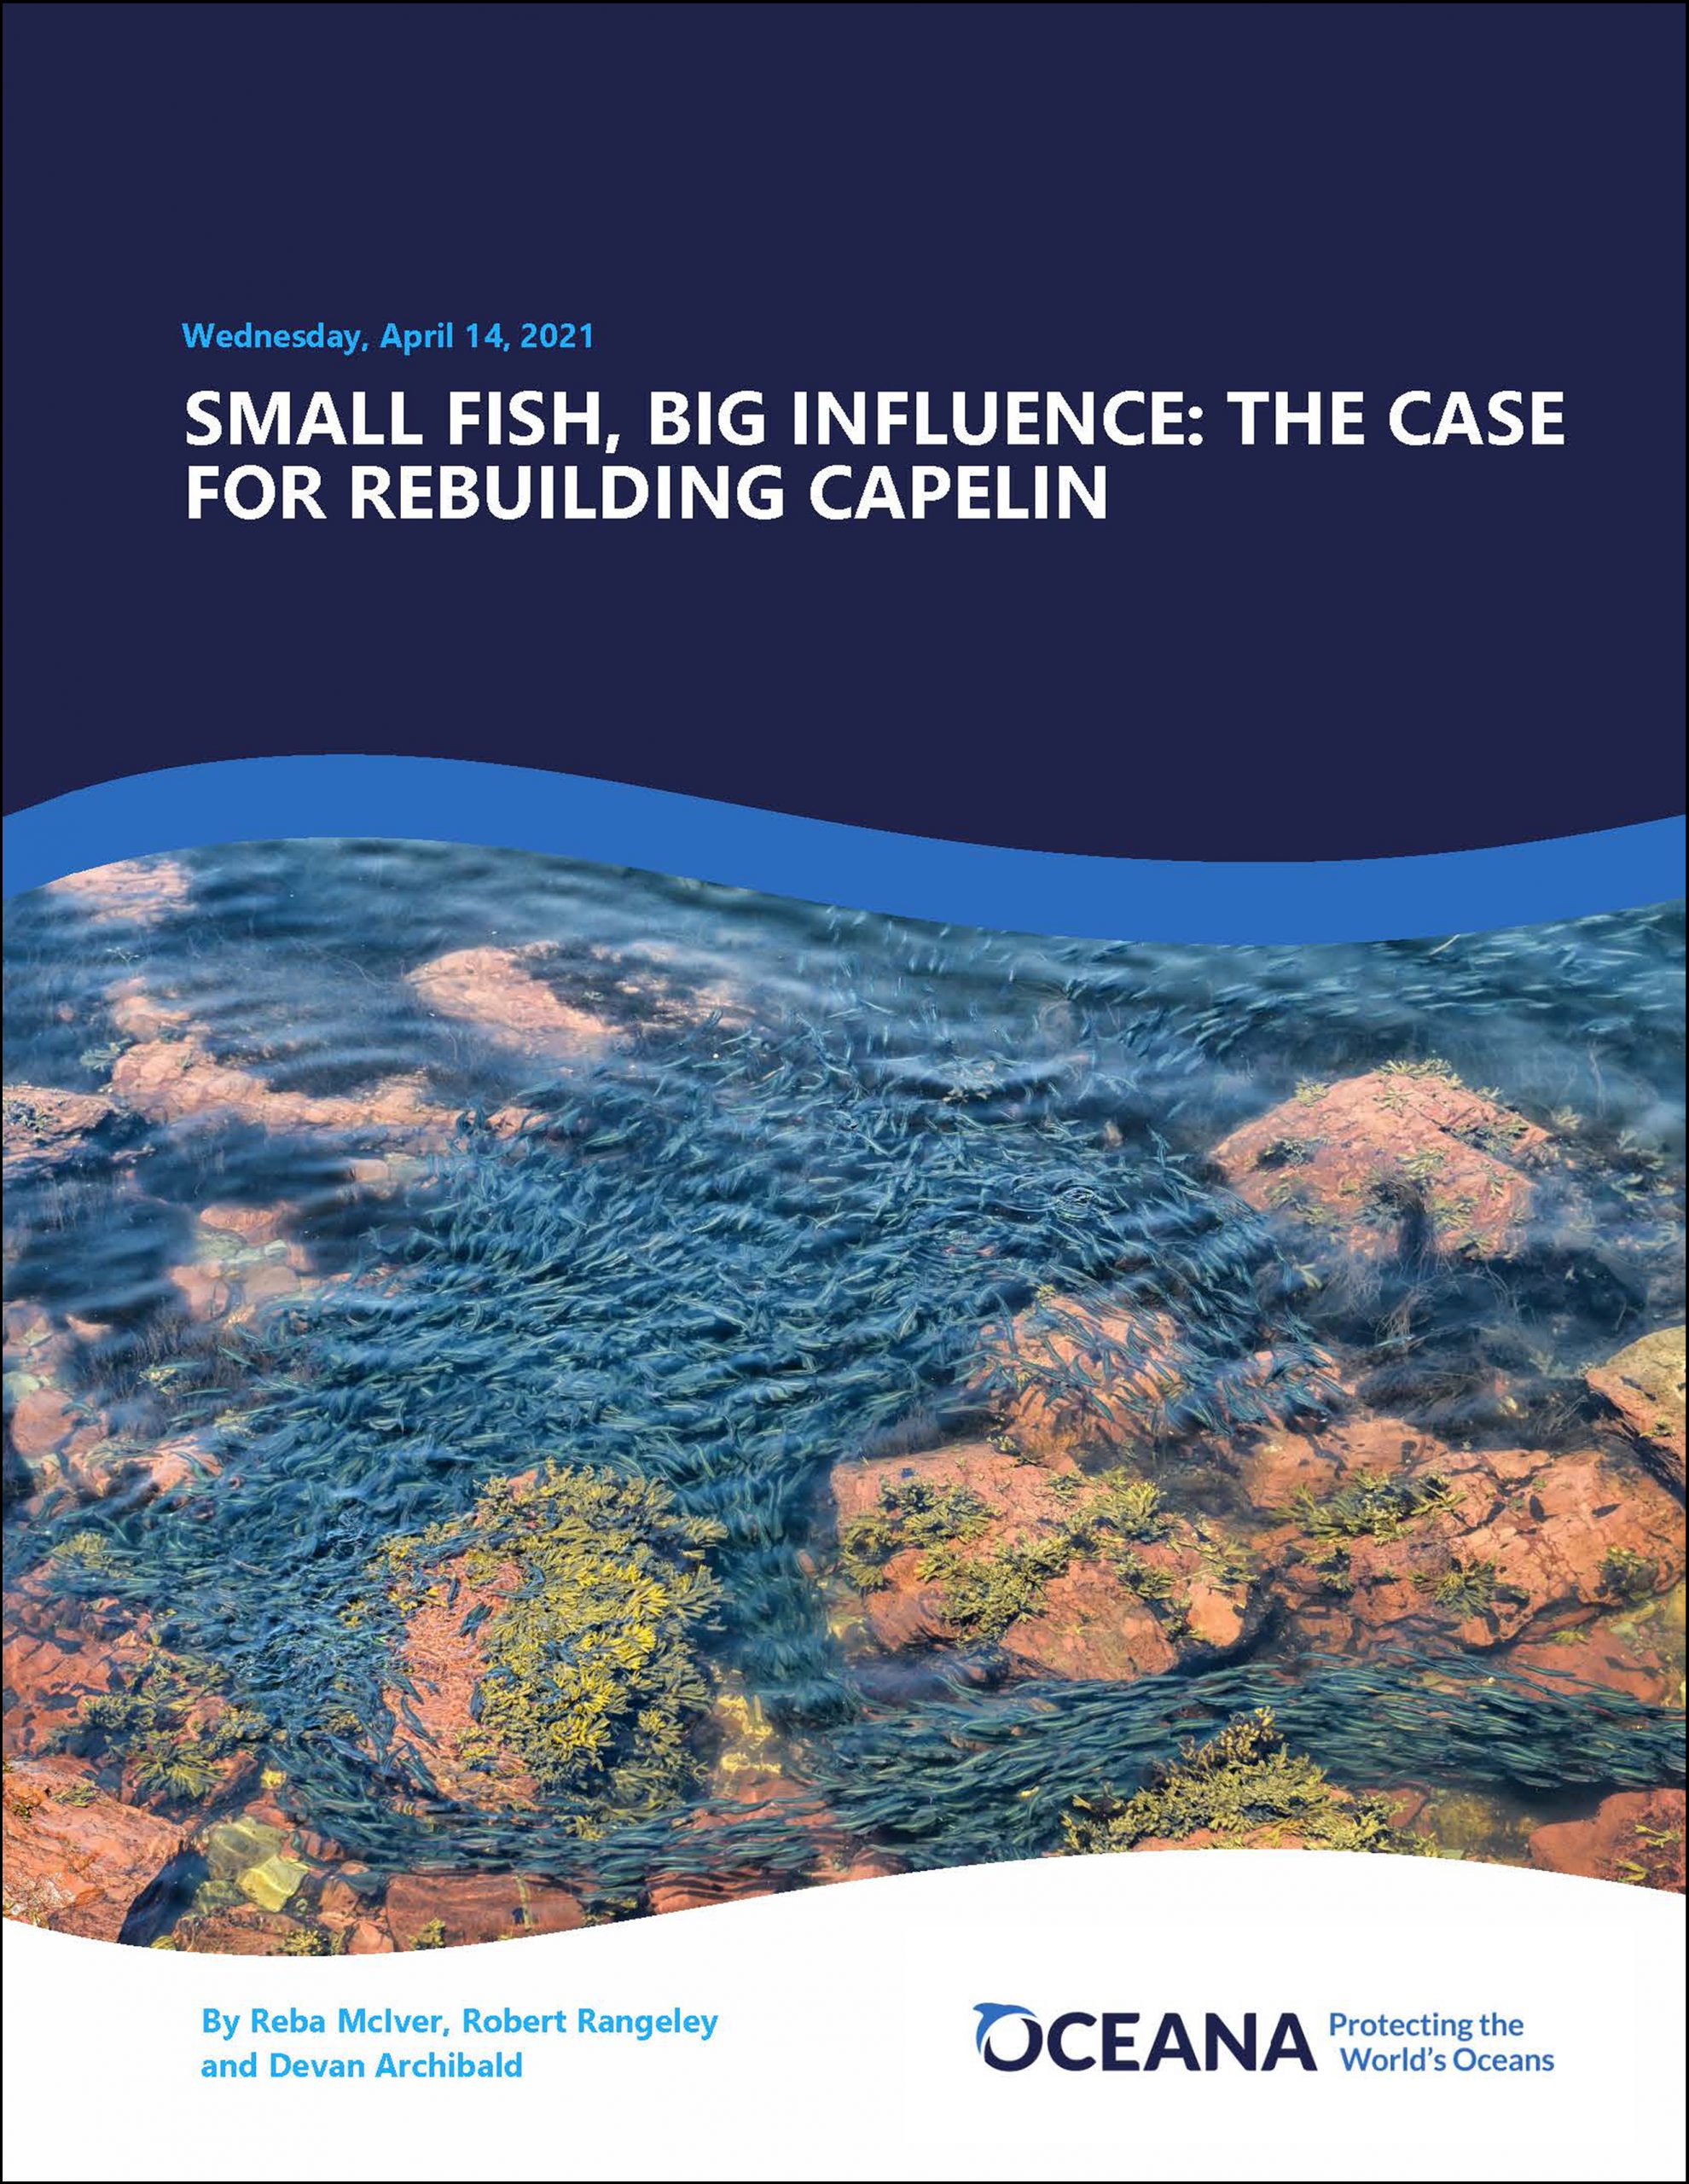 Oceana: Small fish, big influence: the case for rebuilding capelin